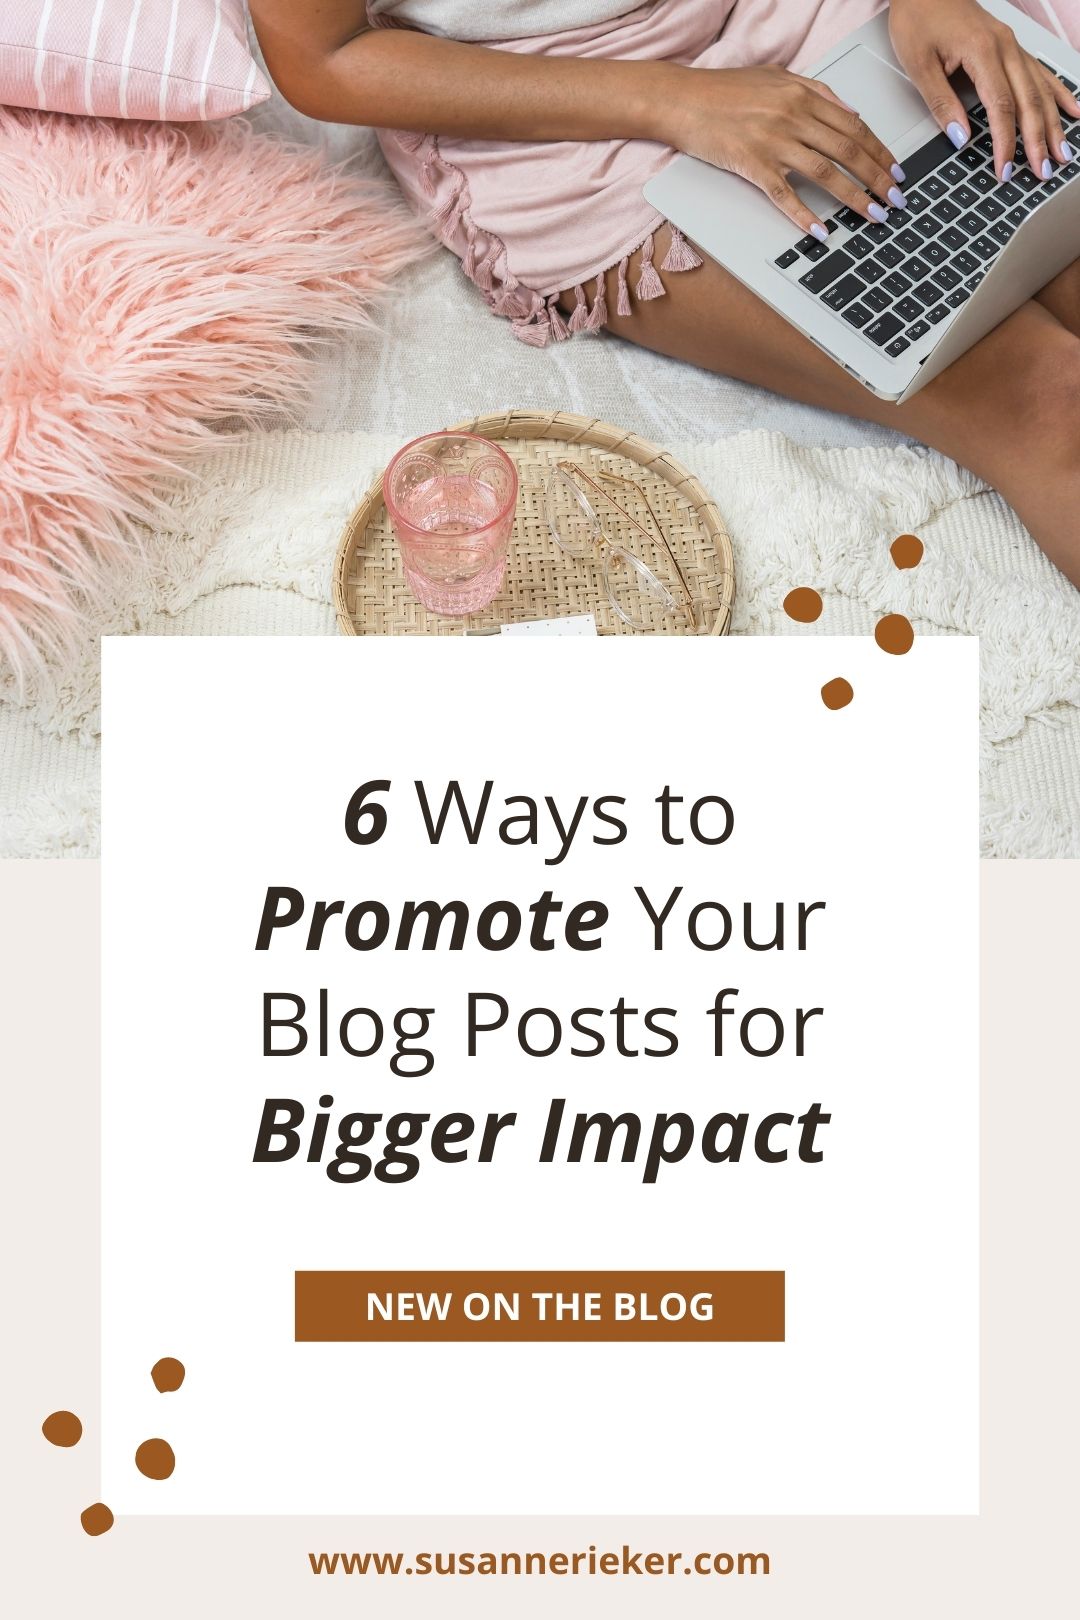 6 Ways to Promote Your Blog Posts for Bigger Impact